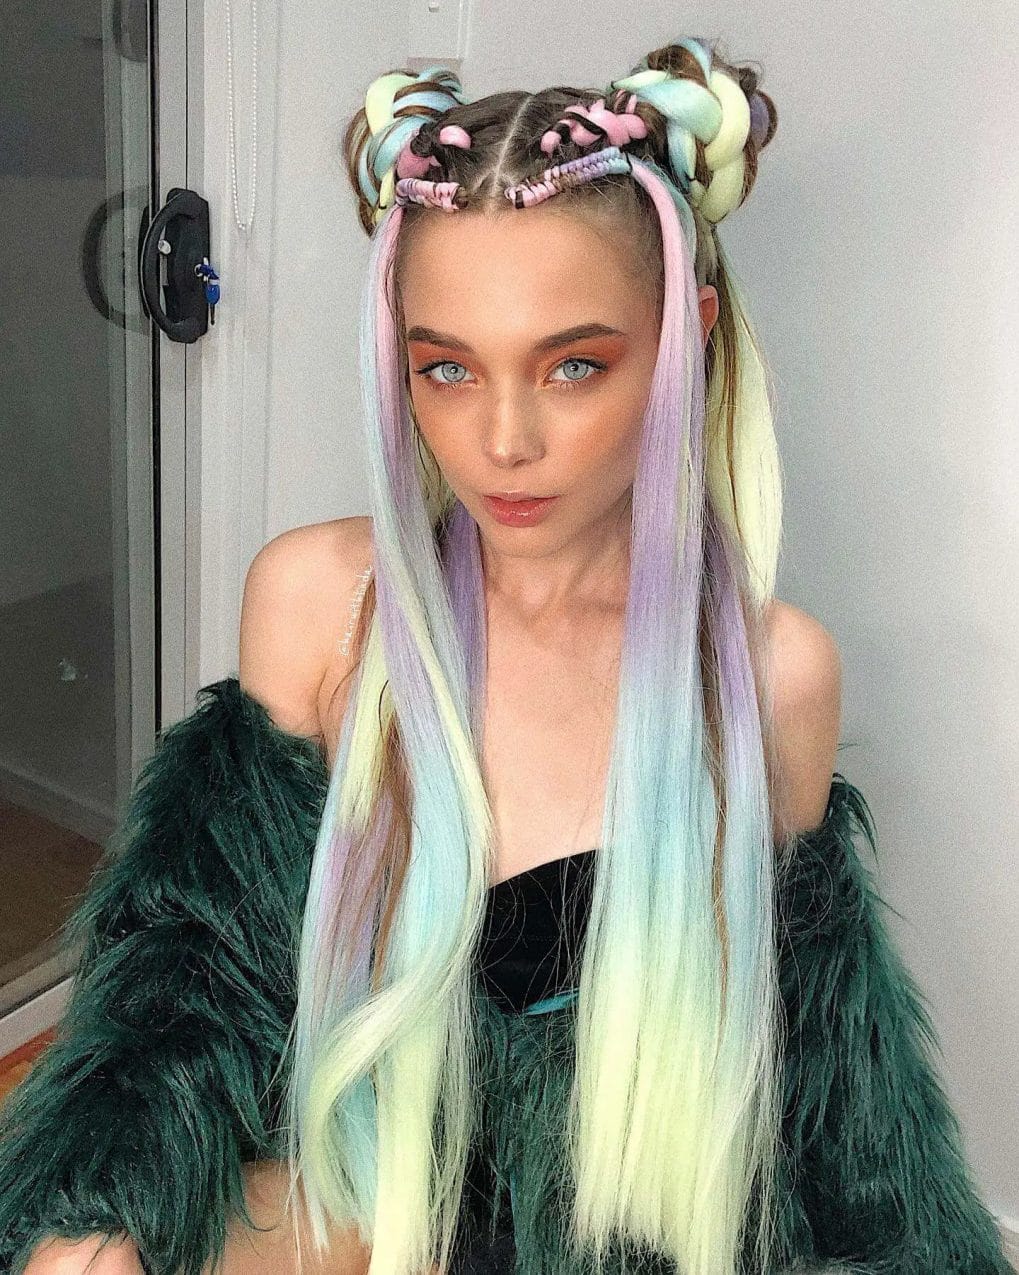 Sleek locks in pastel rainbow hues with playful space buns, perfect for making a statement at festivals.